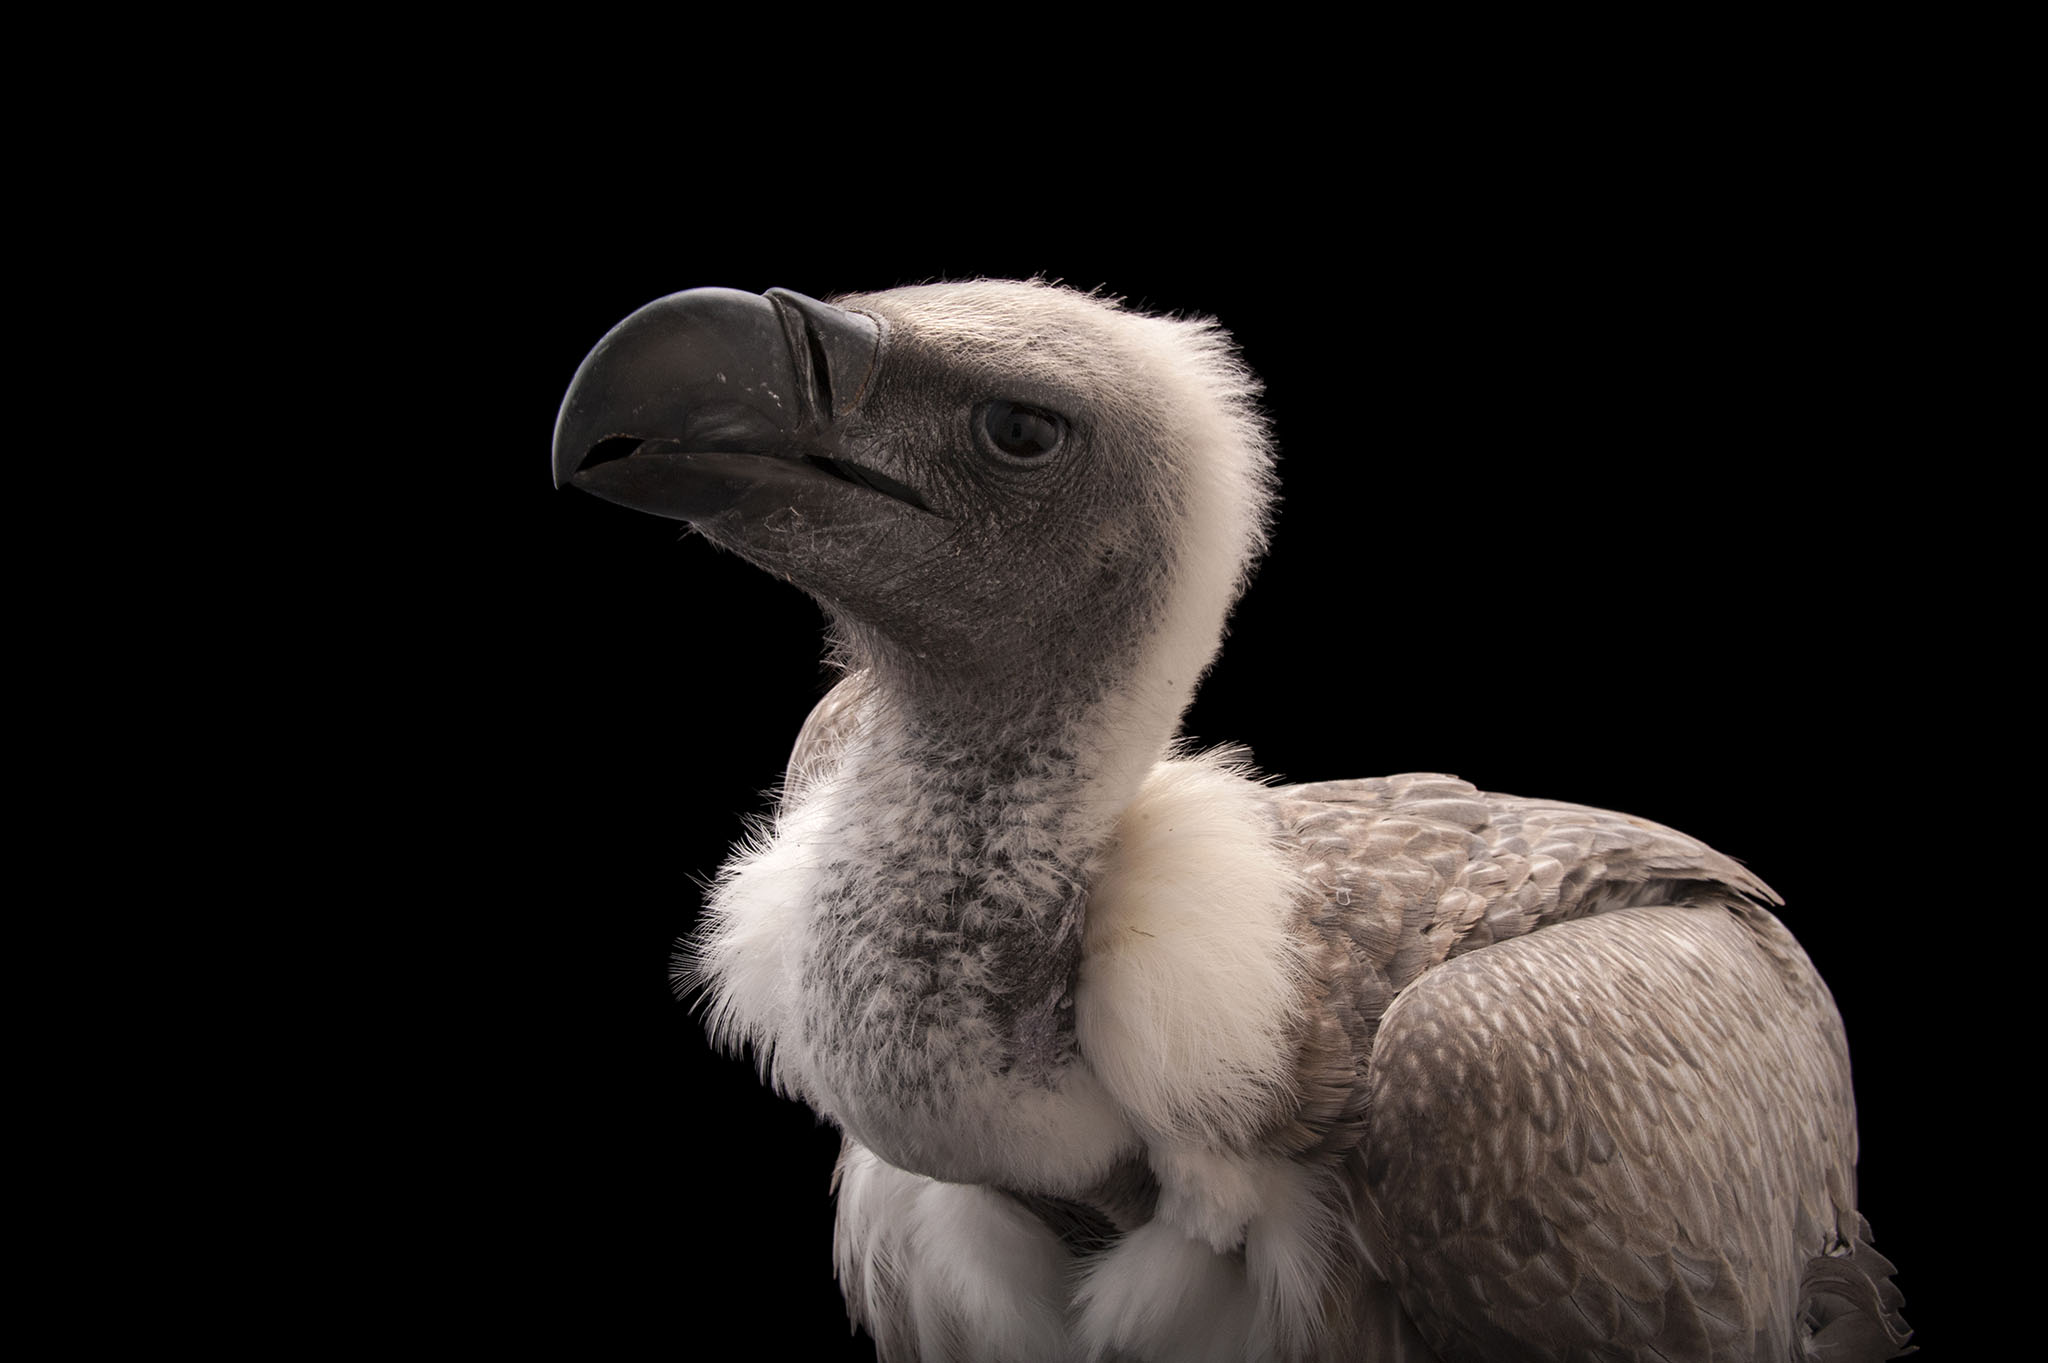 This Vulture Flew 1,000 Miles in Record-Breaking Flight Across Africa